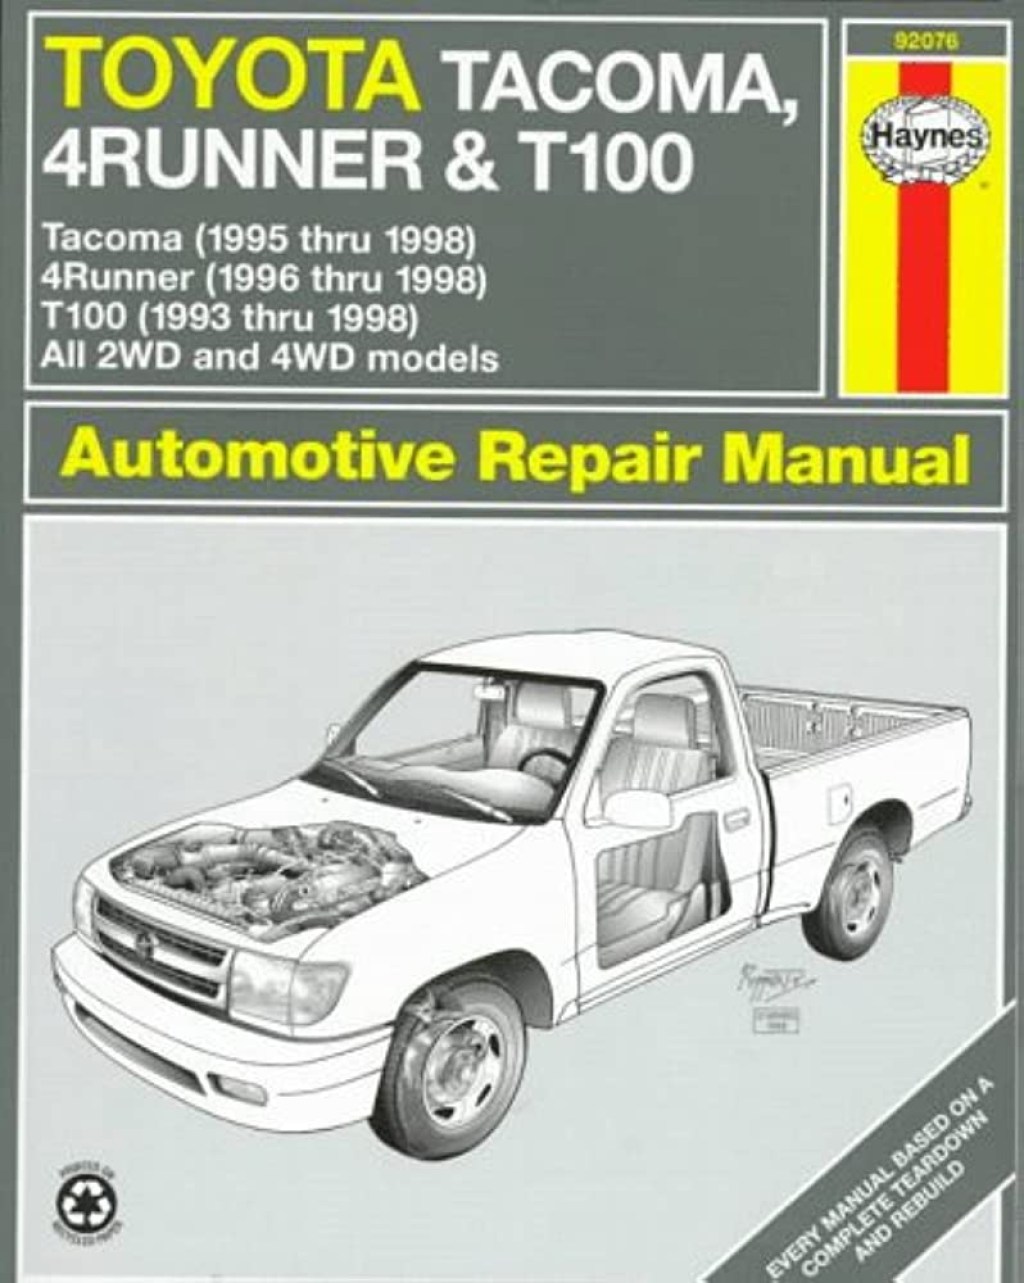 Picture of: Toyota Tacoma, Runner & T Automotive Repair Manual: Models Covered Wd  and Wd Toyota Tacoma ( Thru ), Runner ( Thru ) and T